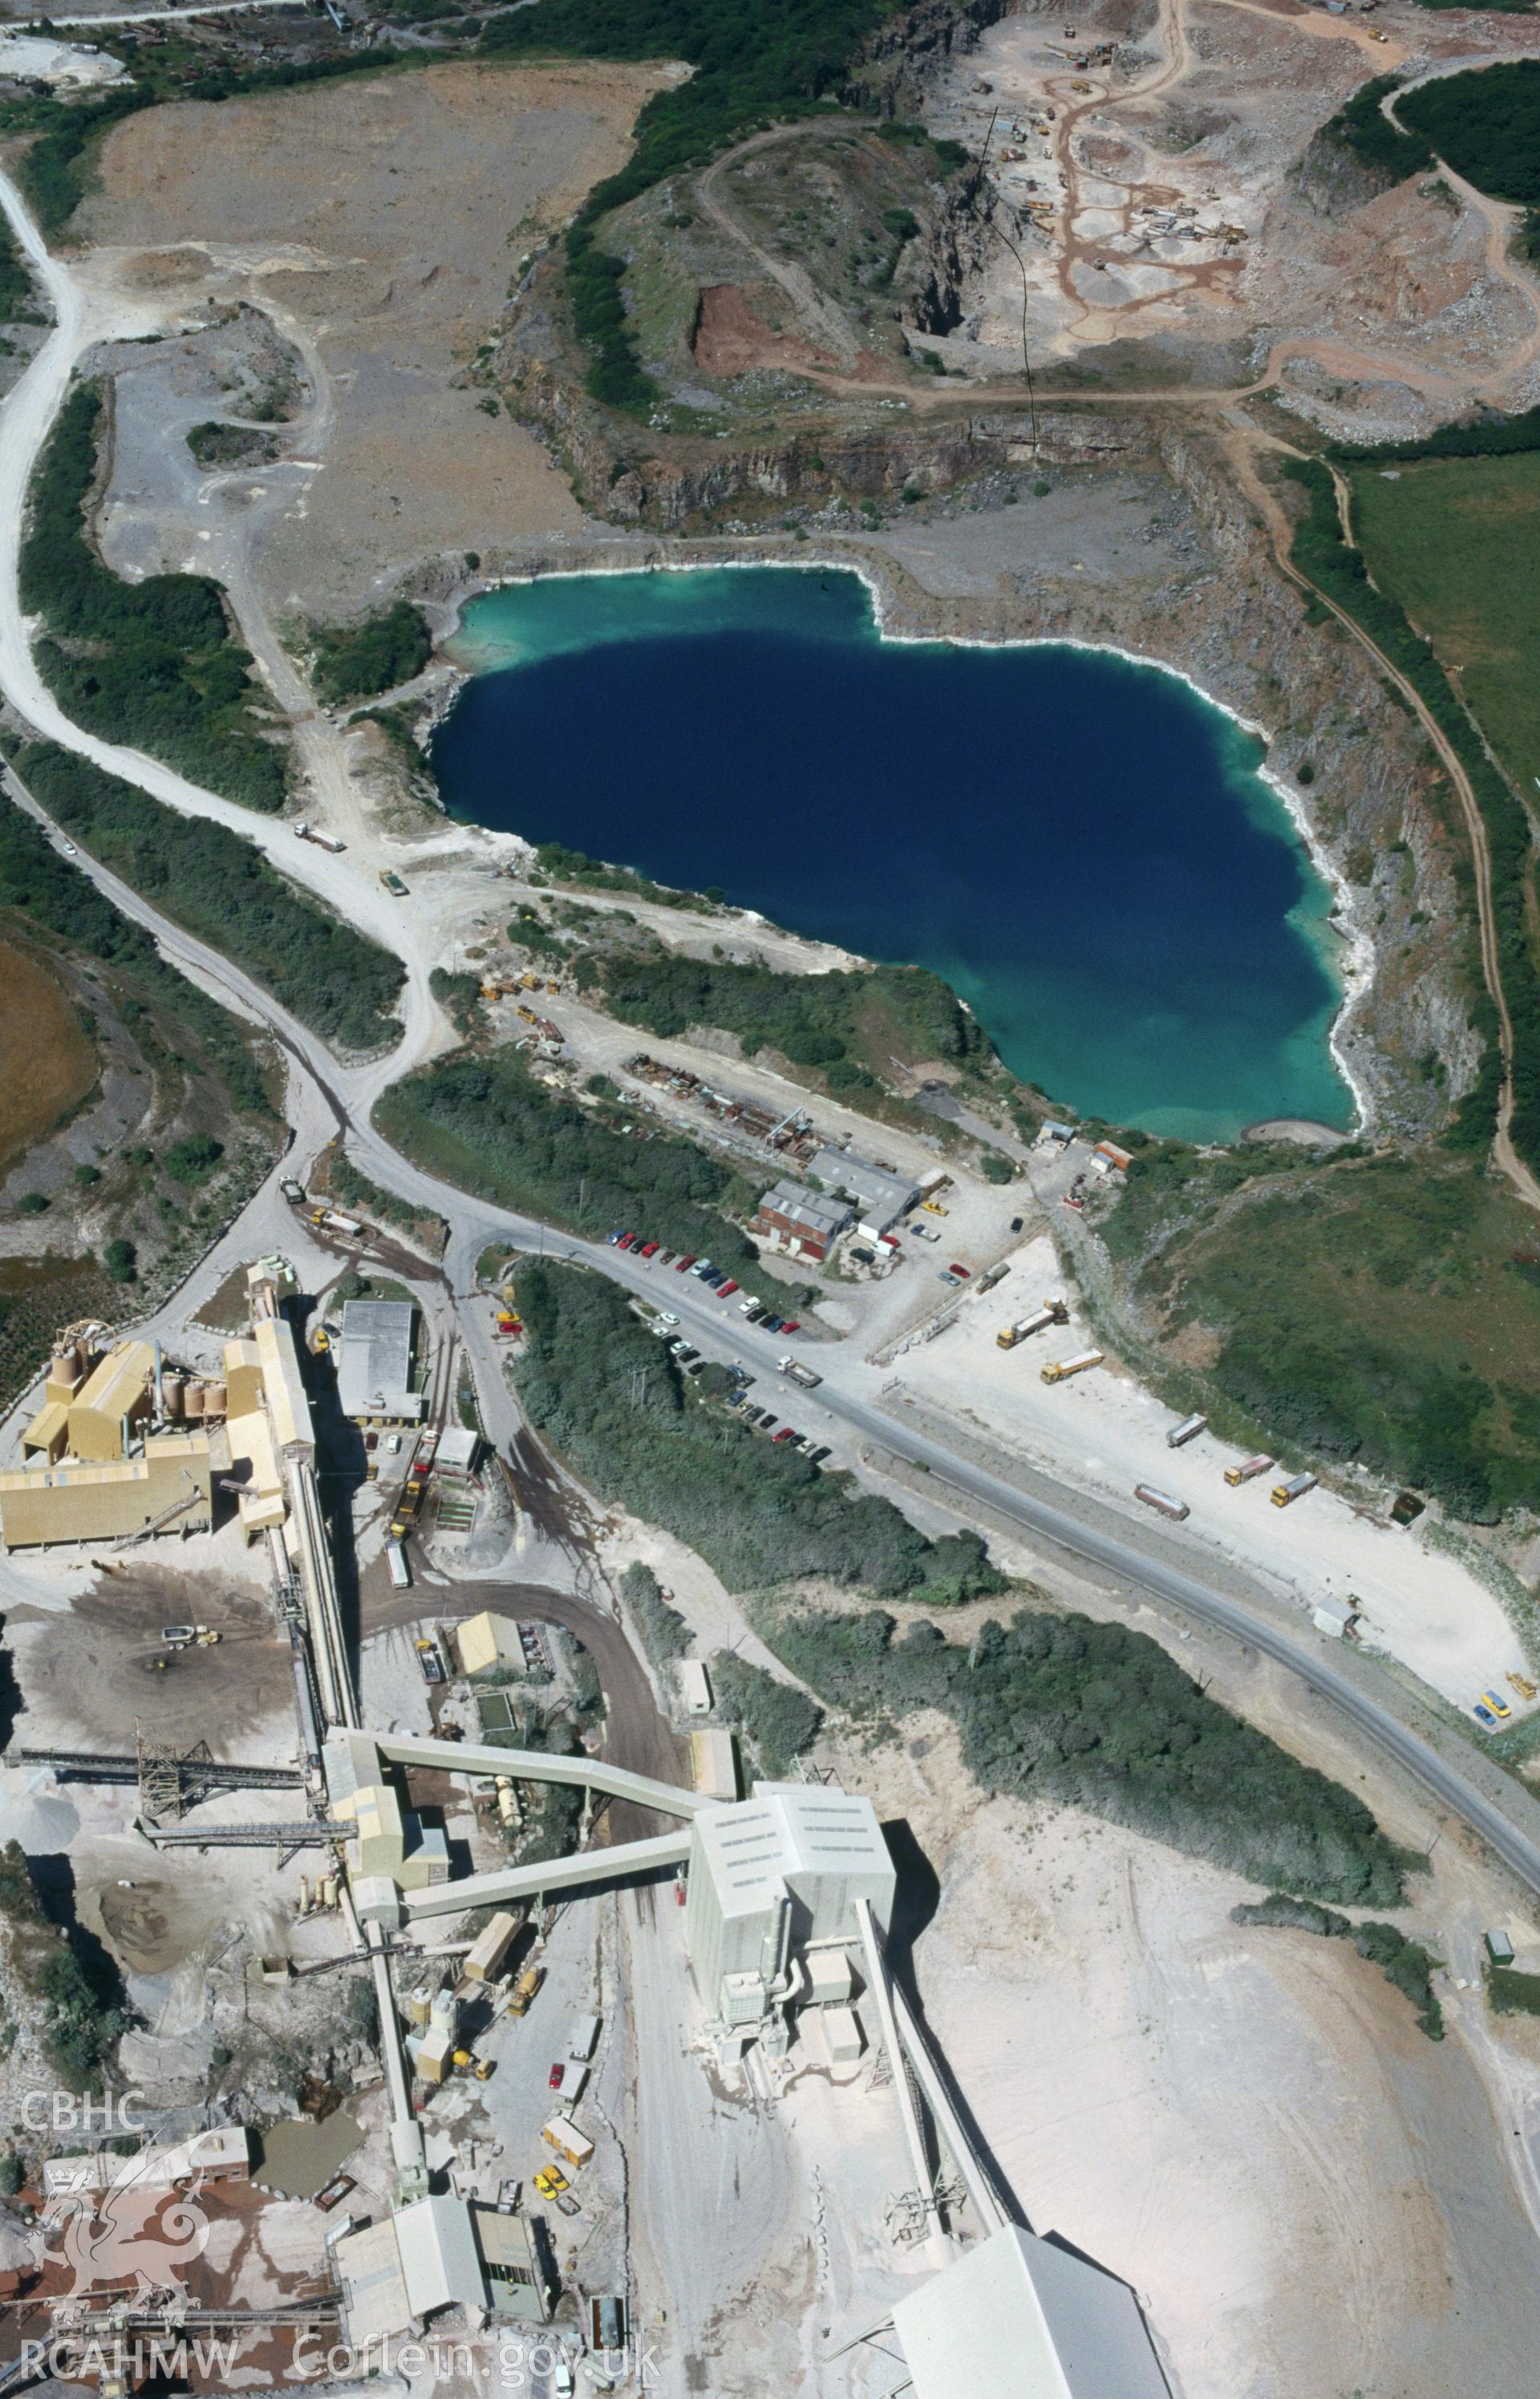 Slide of RCAHMW colour oblique aerial photograph of Cynffig Quarry, taken by C.R. Musson, 25/7/1996.